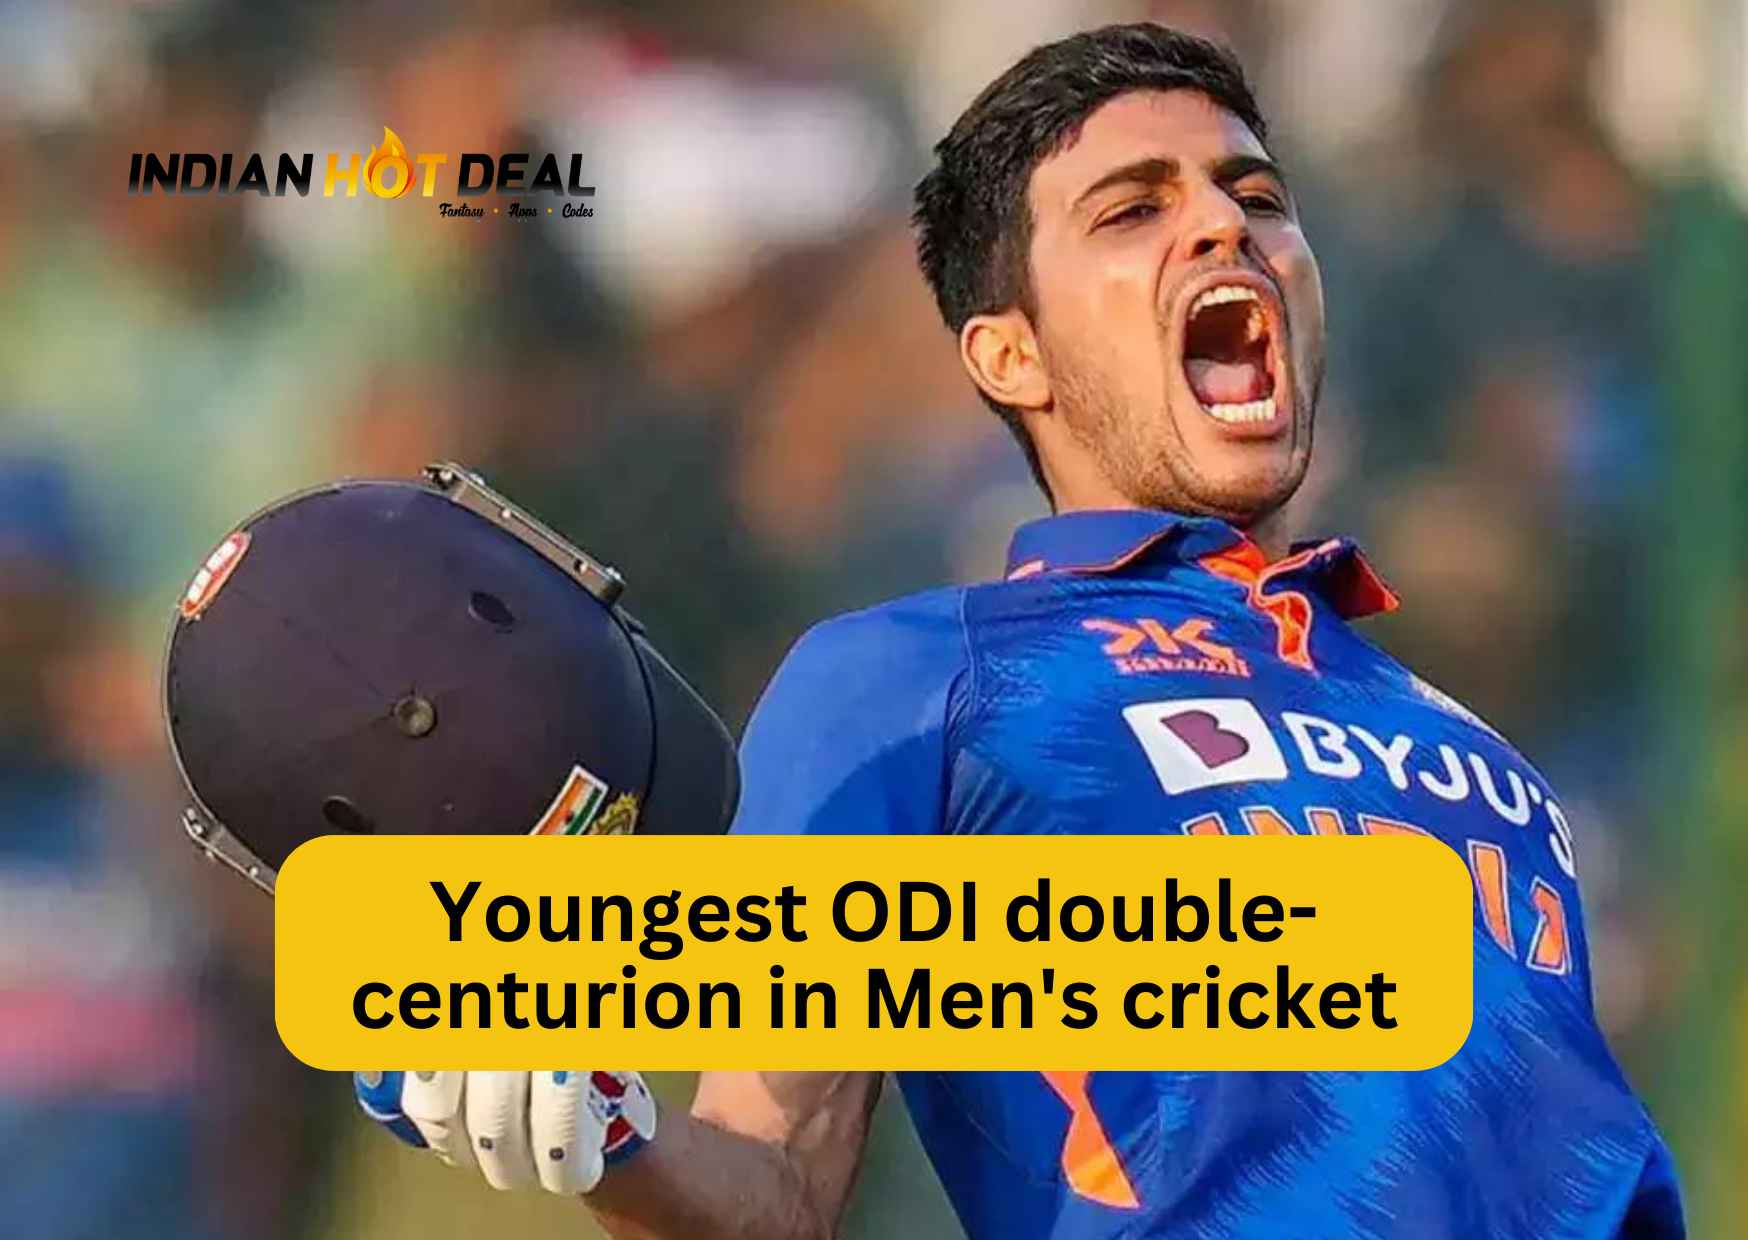 Youngest ODI double-centurion (in Men's cricket)